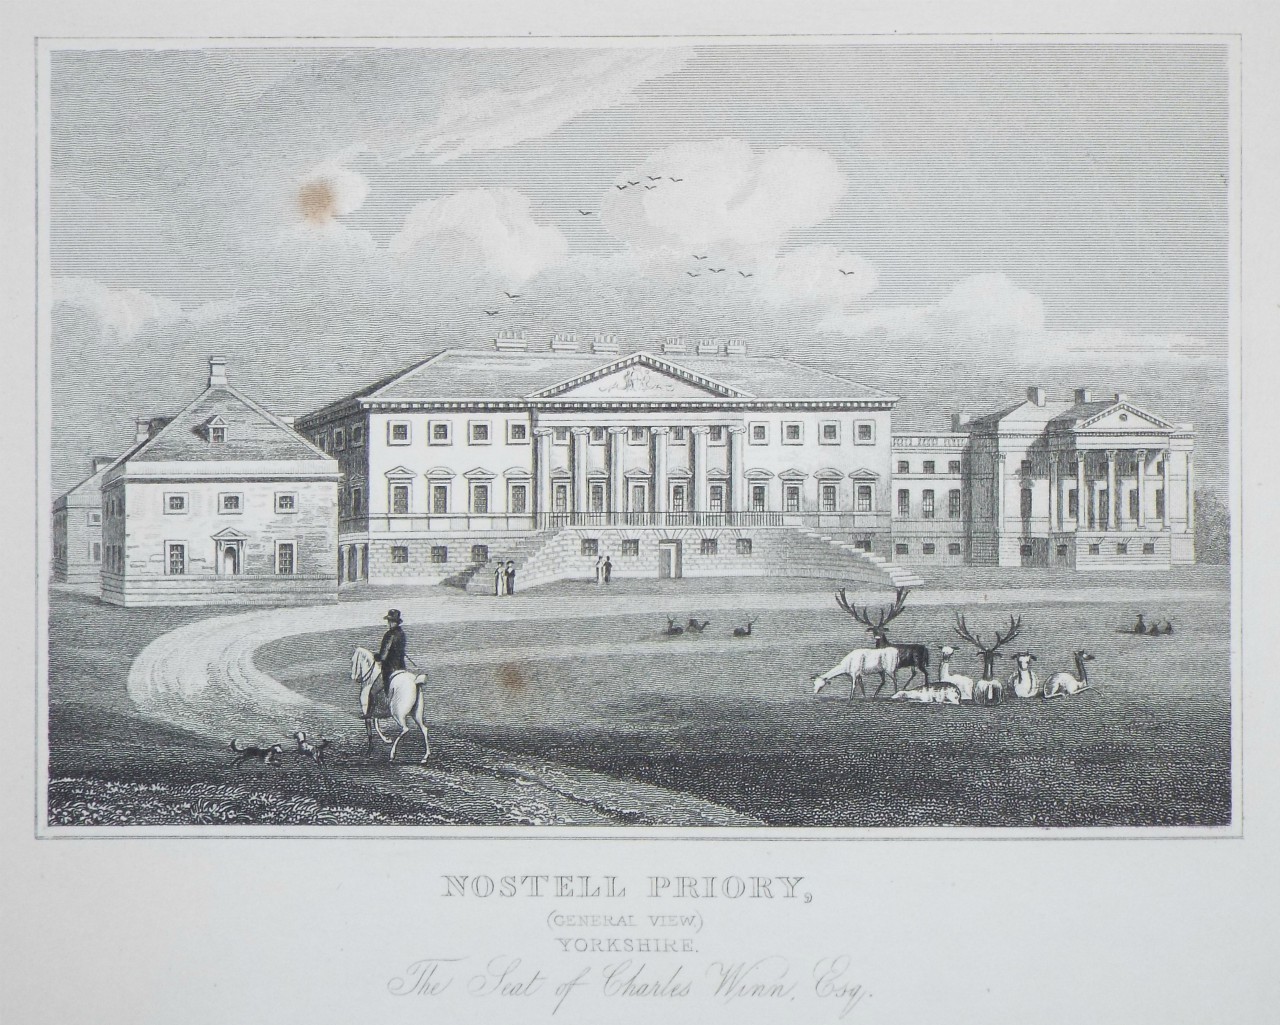 Print - Nostell Priory, (General View) Yorkshire. The Seat of Charles Winn, Esq. - Neale